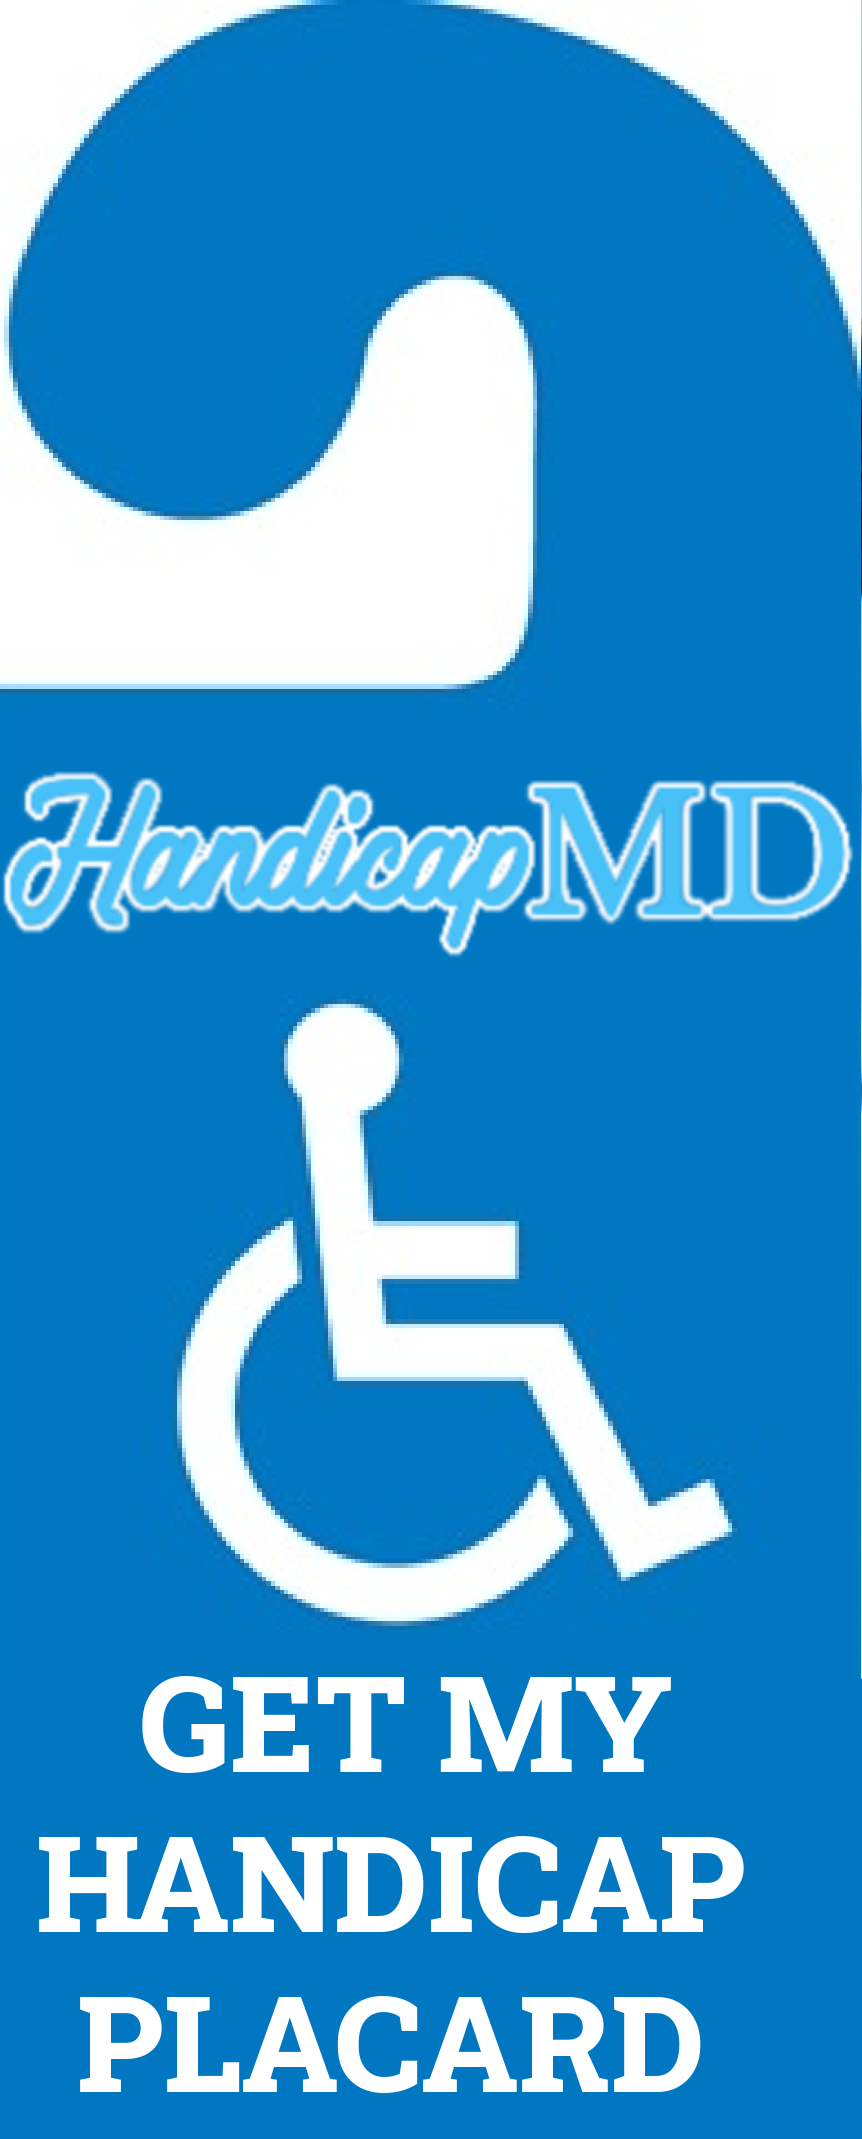 How to Obtain a Disabled Parking Permit in Baltimore MD